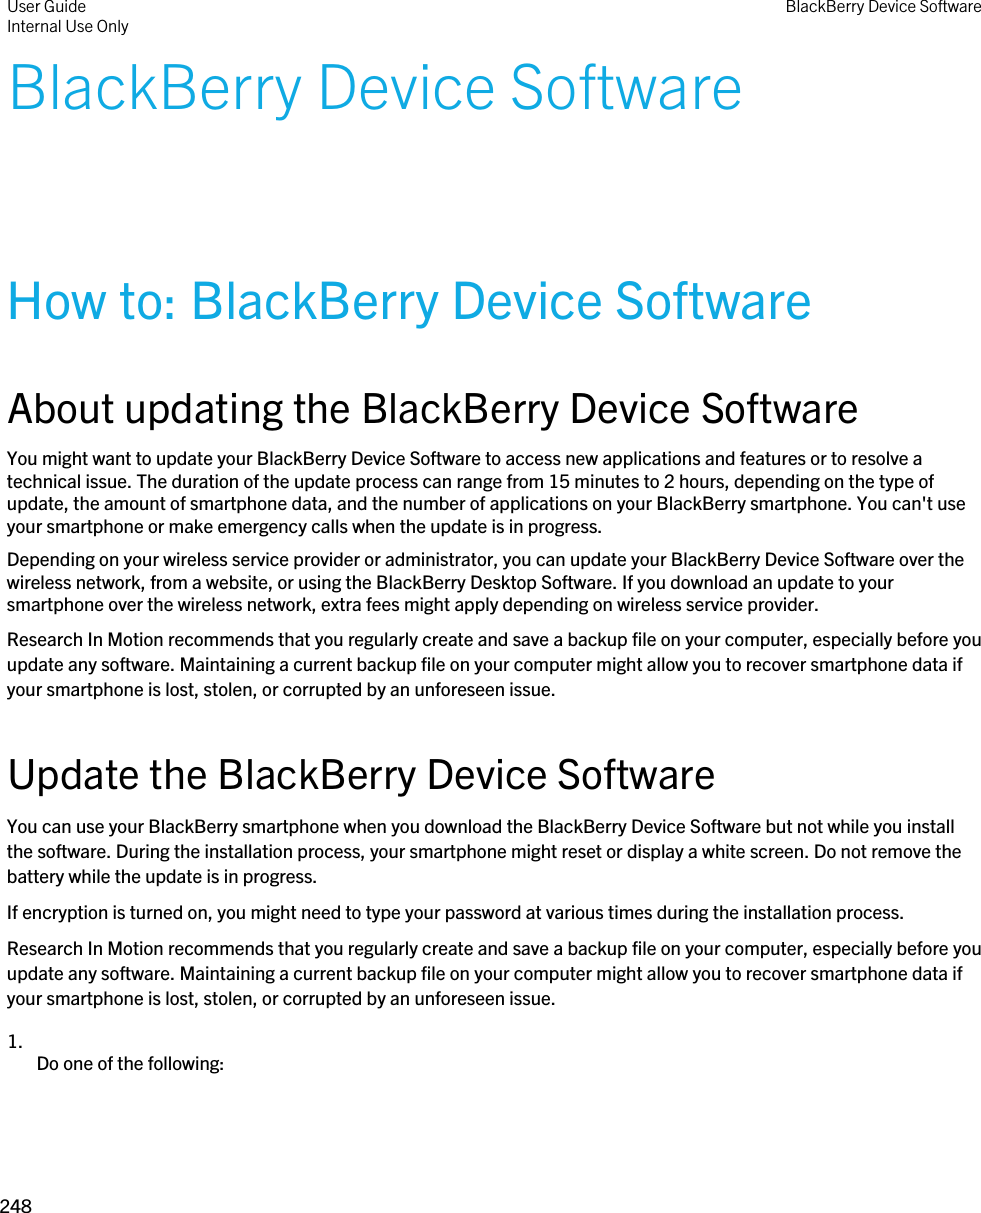 BlackBerry Device SoftwareHow to: BlackBerry Device SoftwareAbout updating the BlackBerry Device SoftwareYou might want to update your BlackBerry Device Software to access new applications and features or to resolve a technical issue. The duration of the update process can range from 15 minutes to 2 hours, depending on the type of update, the amount of smartphone data, and the number of applications on your BlackBerry smartphone. You can&apos;t use your smartphone or make emergency calls when the update is in progress.Depending on your wireless service provider or administrator, you can update your BlackBerry Device Software over the wireless network, from a website, or using the BlackBerry Desktop Software. If you download an update to your smartphone over the wireless network, extra fees might apply depending on wireless service provider.Research In Motion recommends that you regularly create and save a backup file on your computer, especially before you update any software. Maintaining a current backup file on your computer might allow you to recover smartphone data if your smartphone is lost, stolen, or corrupted by an unforeseen issue.Update the BlackBerry Device SoftwareYou can use your BlackBerry smartphone when you download the BlackBerry Device Software but not while you install the software. During the installation process, your smartphone might reset or display a white screen. Do not remove the battery while the update is in progress.If encryption is turned on, you might need to type your password at various times during the installation process.Research In Motion recommends that you regularly create and save a backup file on your computer, especially before you update any software. Maintaining a current backup file on your computer might allow you to recover smartphone data if your smartphone is lost, stolen, or corrupted by an unforeseen issue.1.  Do one of the following:User GuideInternal Use Only BlackBerry Device Software248 